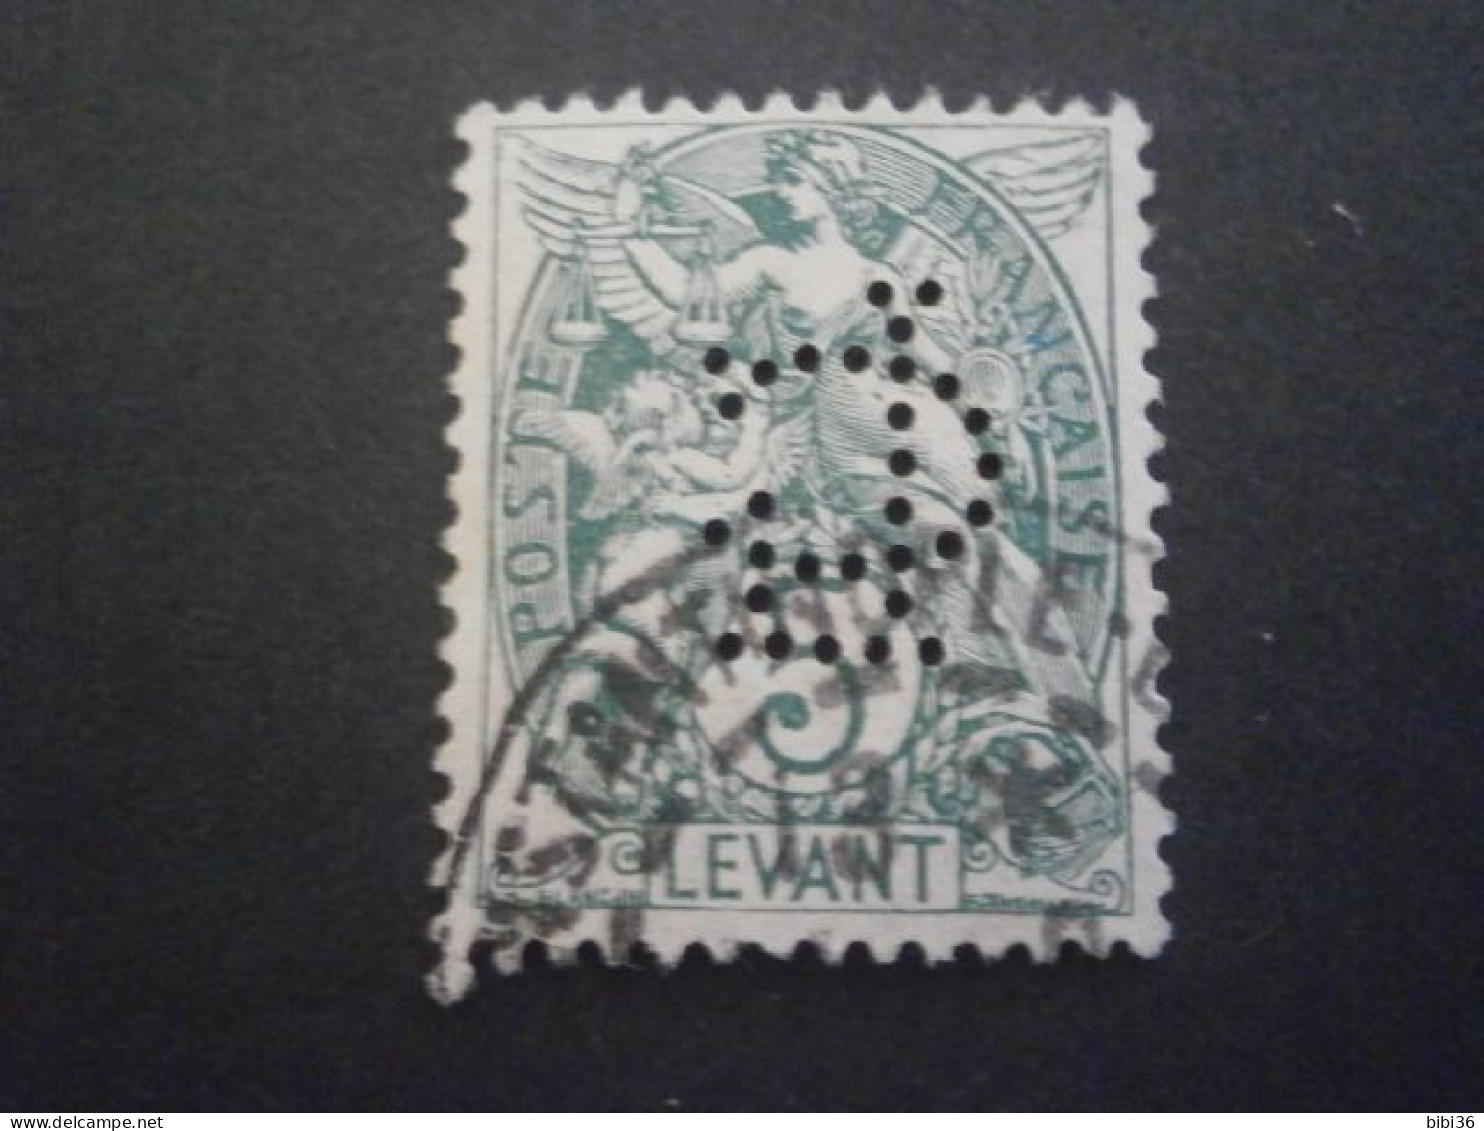 LEVANT BLANC 13 CL5 PERFORATION PERFORES PERFORE PERFIN PERFINS PERFORATION PERFORIERT LOCHUNG PERCE PERFORIERT PERFO - Used Stamps